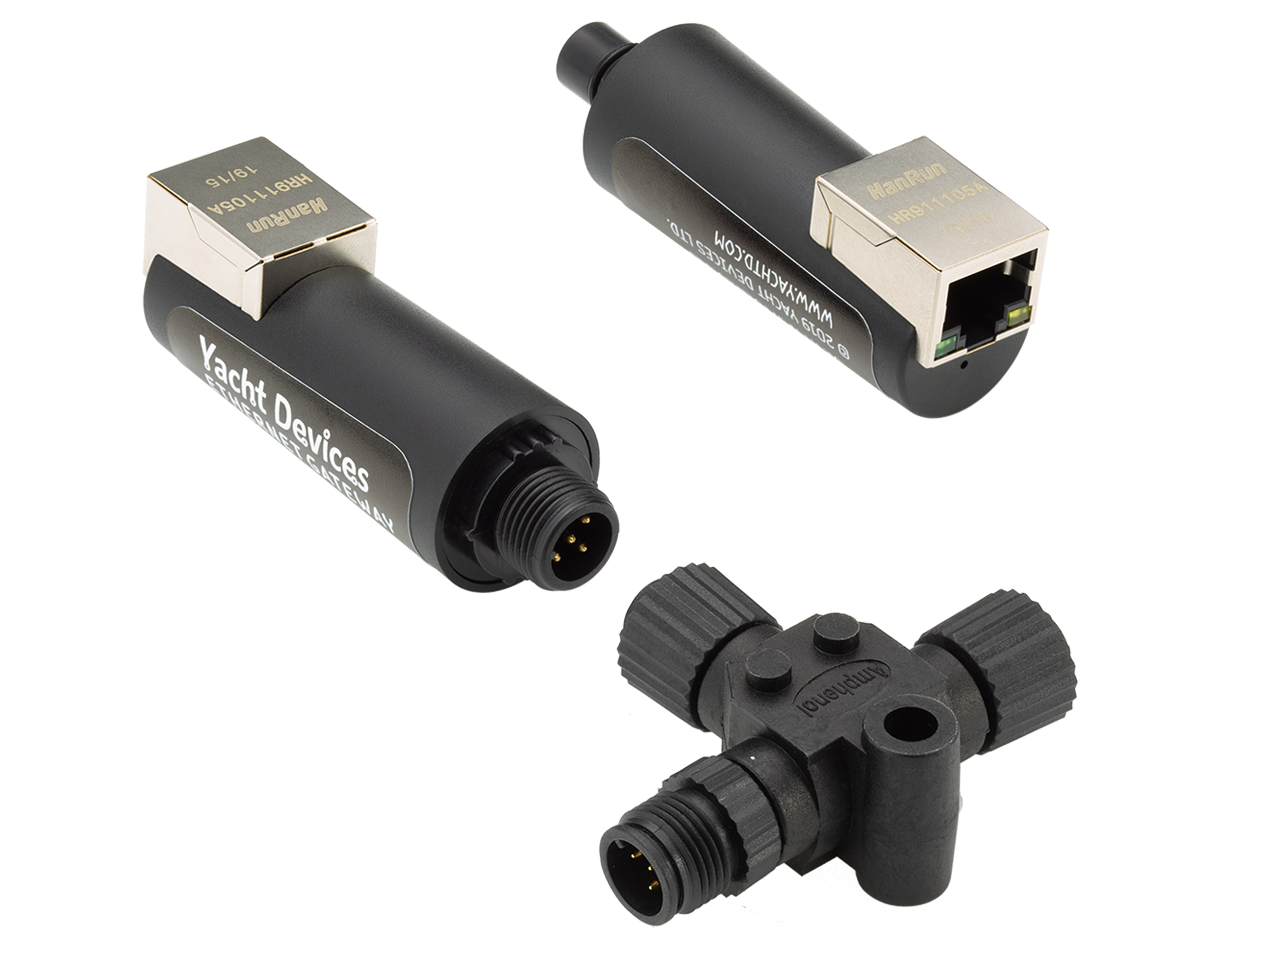 Device connectors and NMEA 2000 T-connector